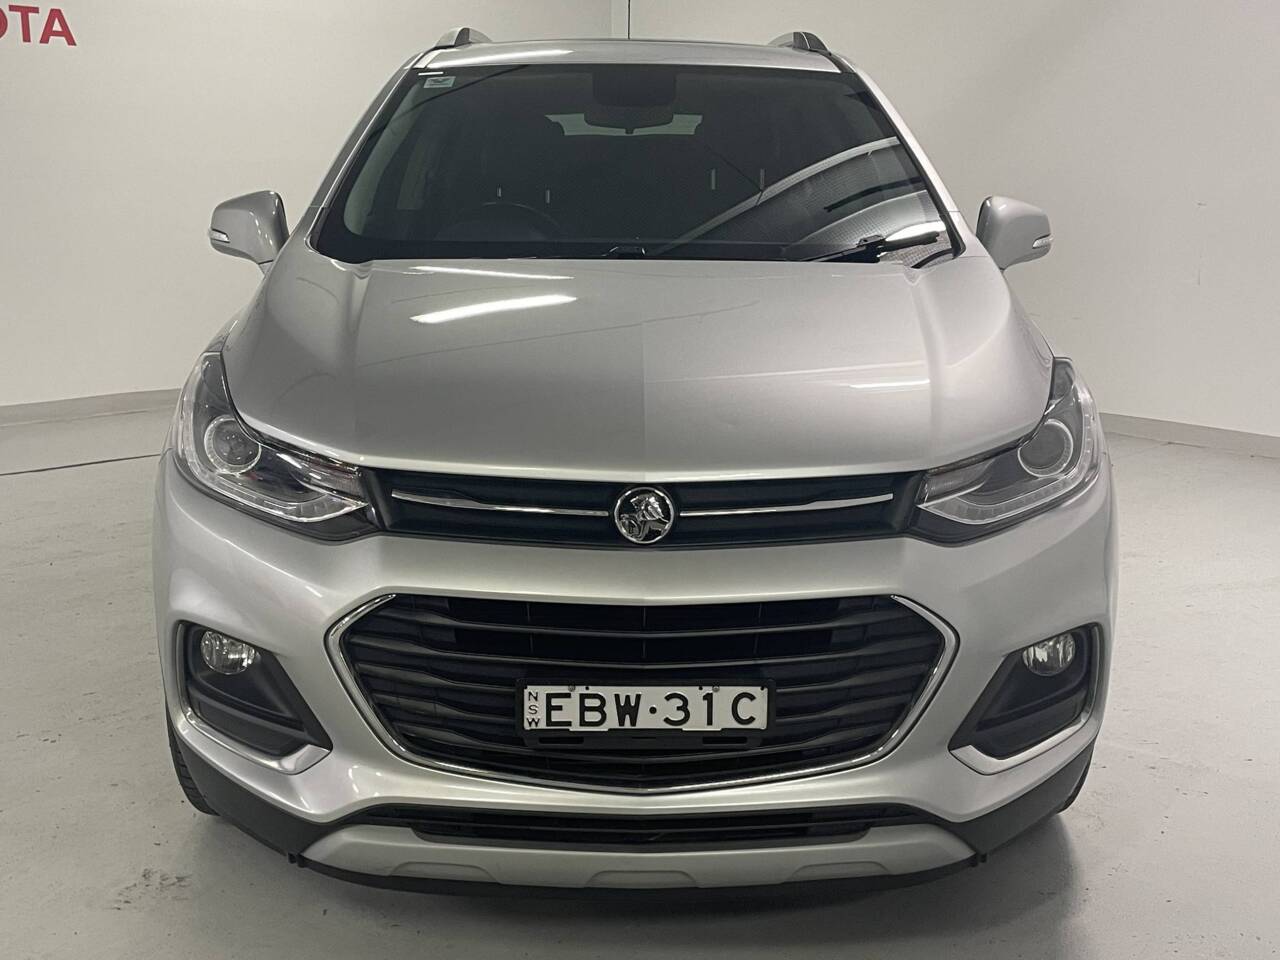 2019 HOLDEN TRAX Image 5